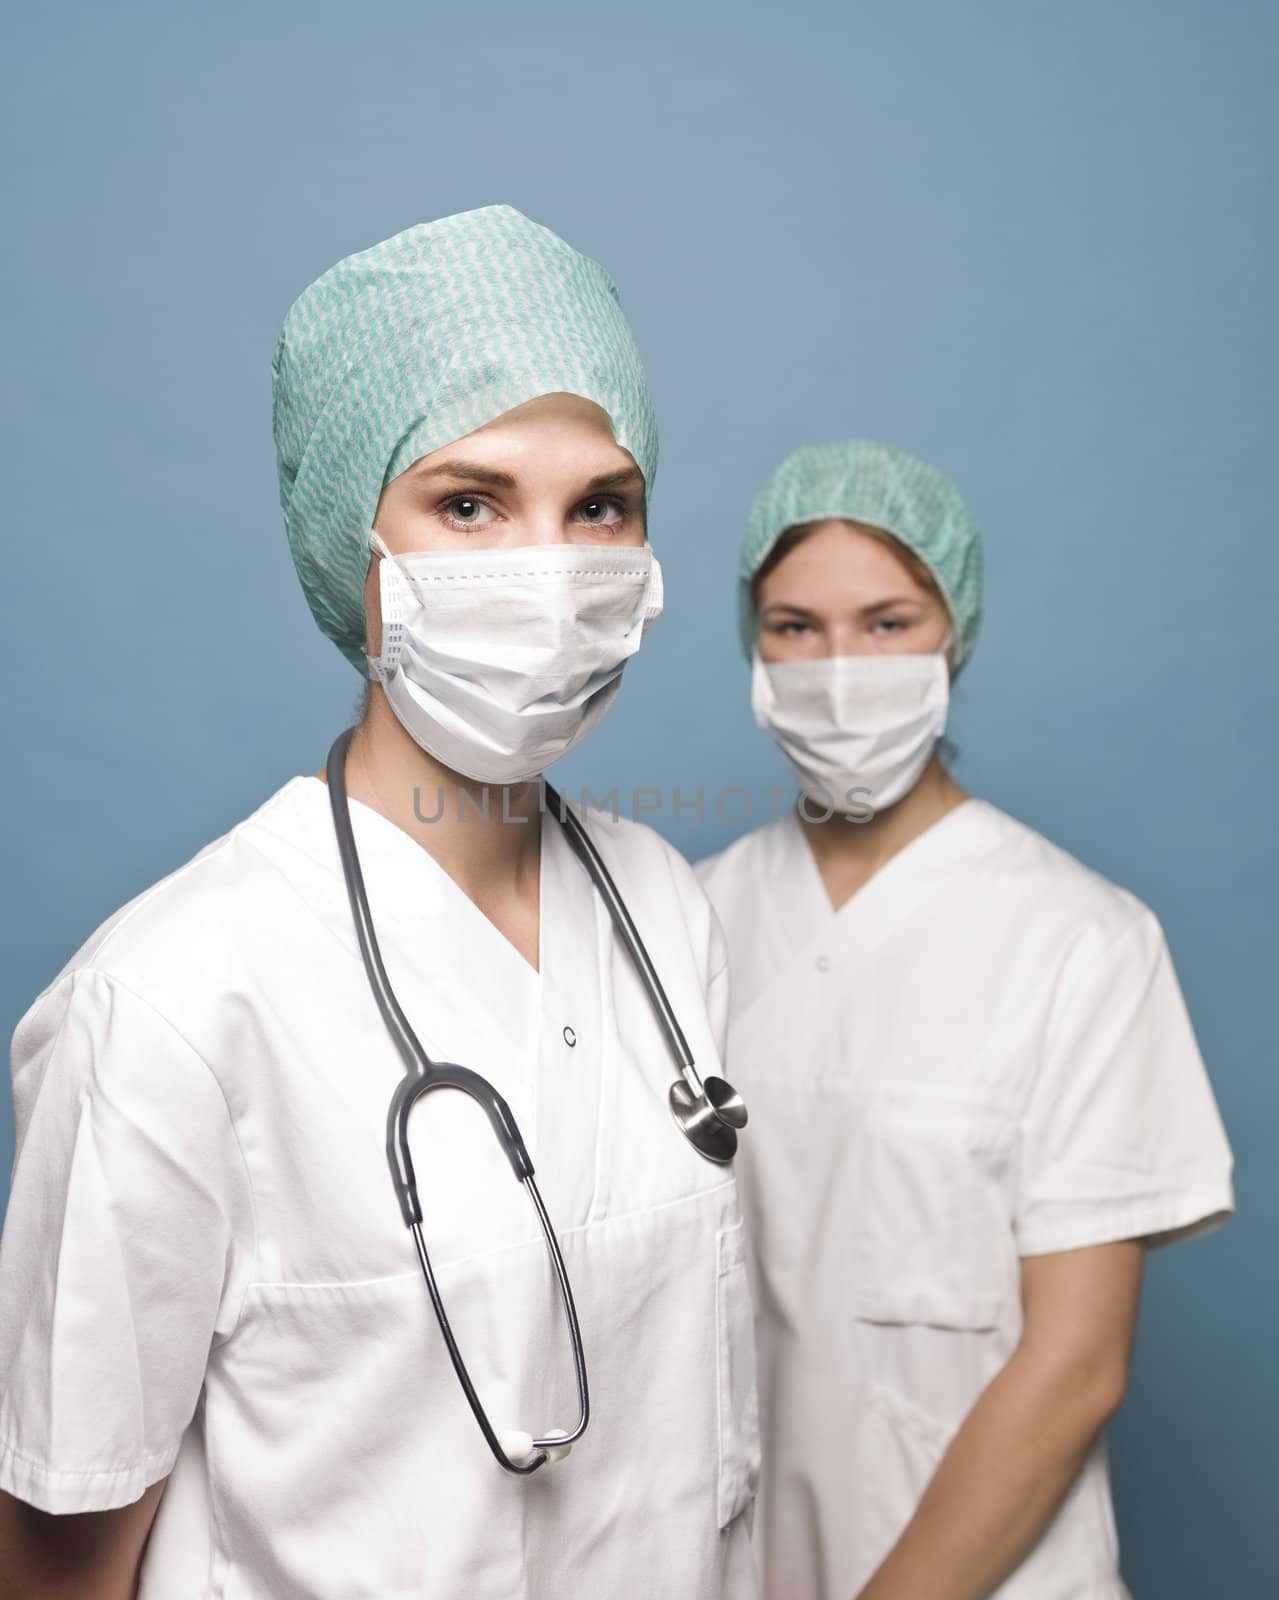 Two nurses with surgical masks and a stethoscope